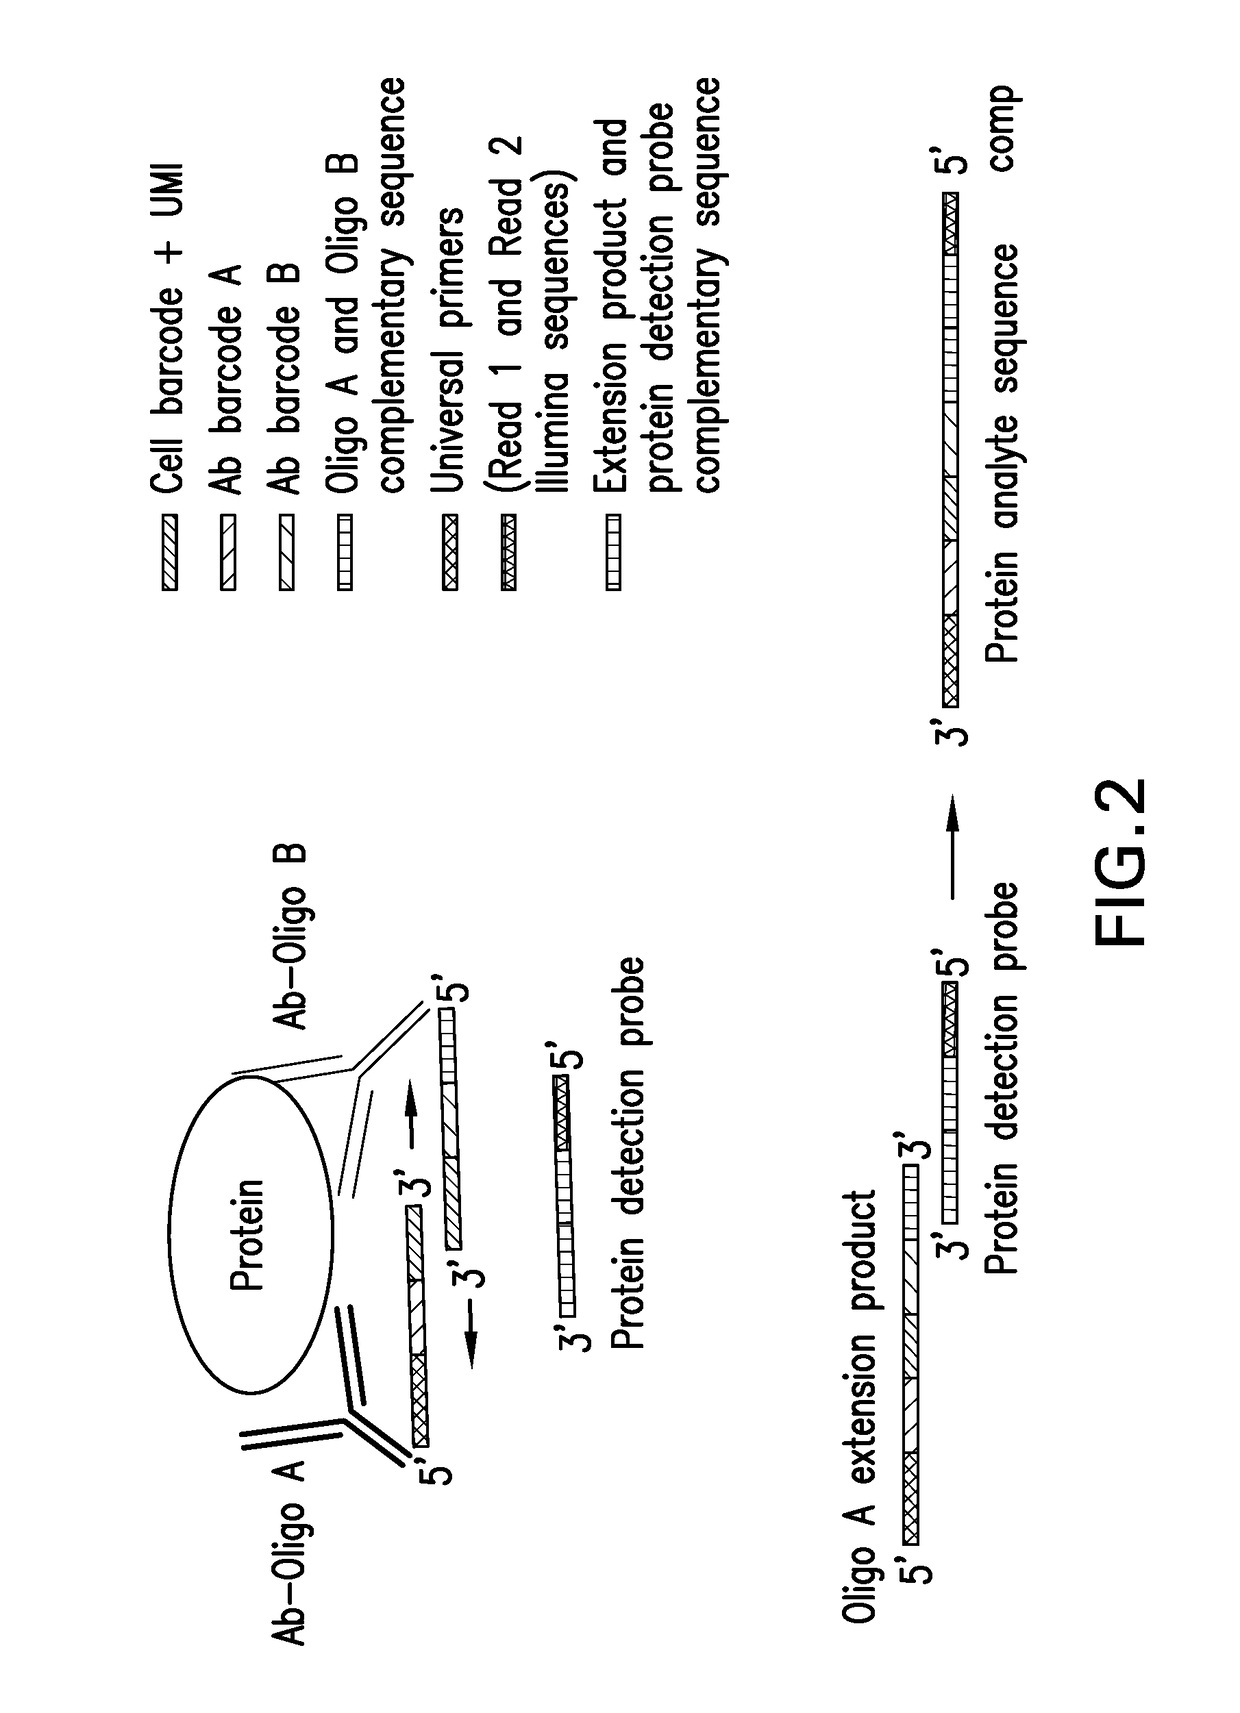 Assay for simultaneous genomic and proteomic analysis